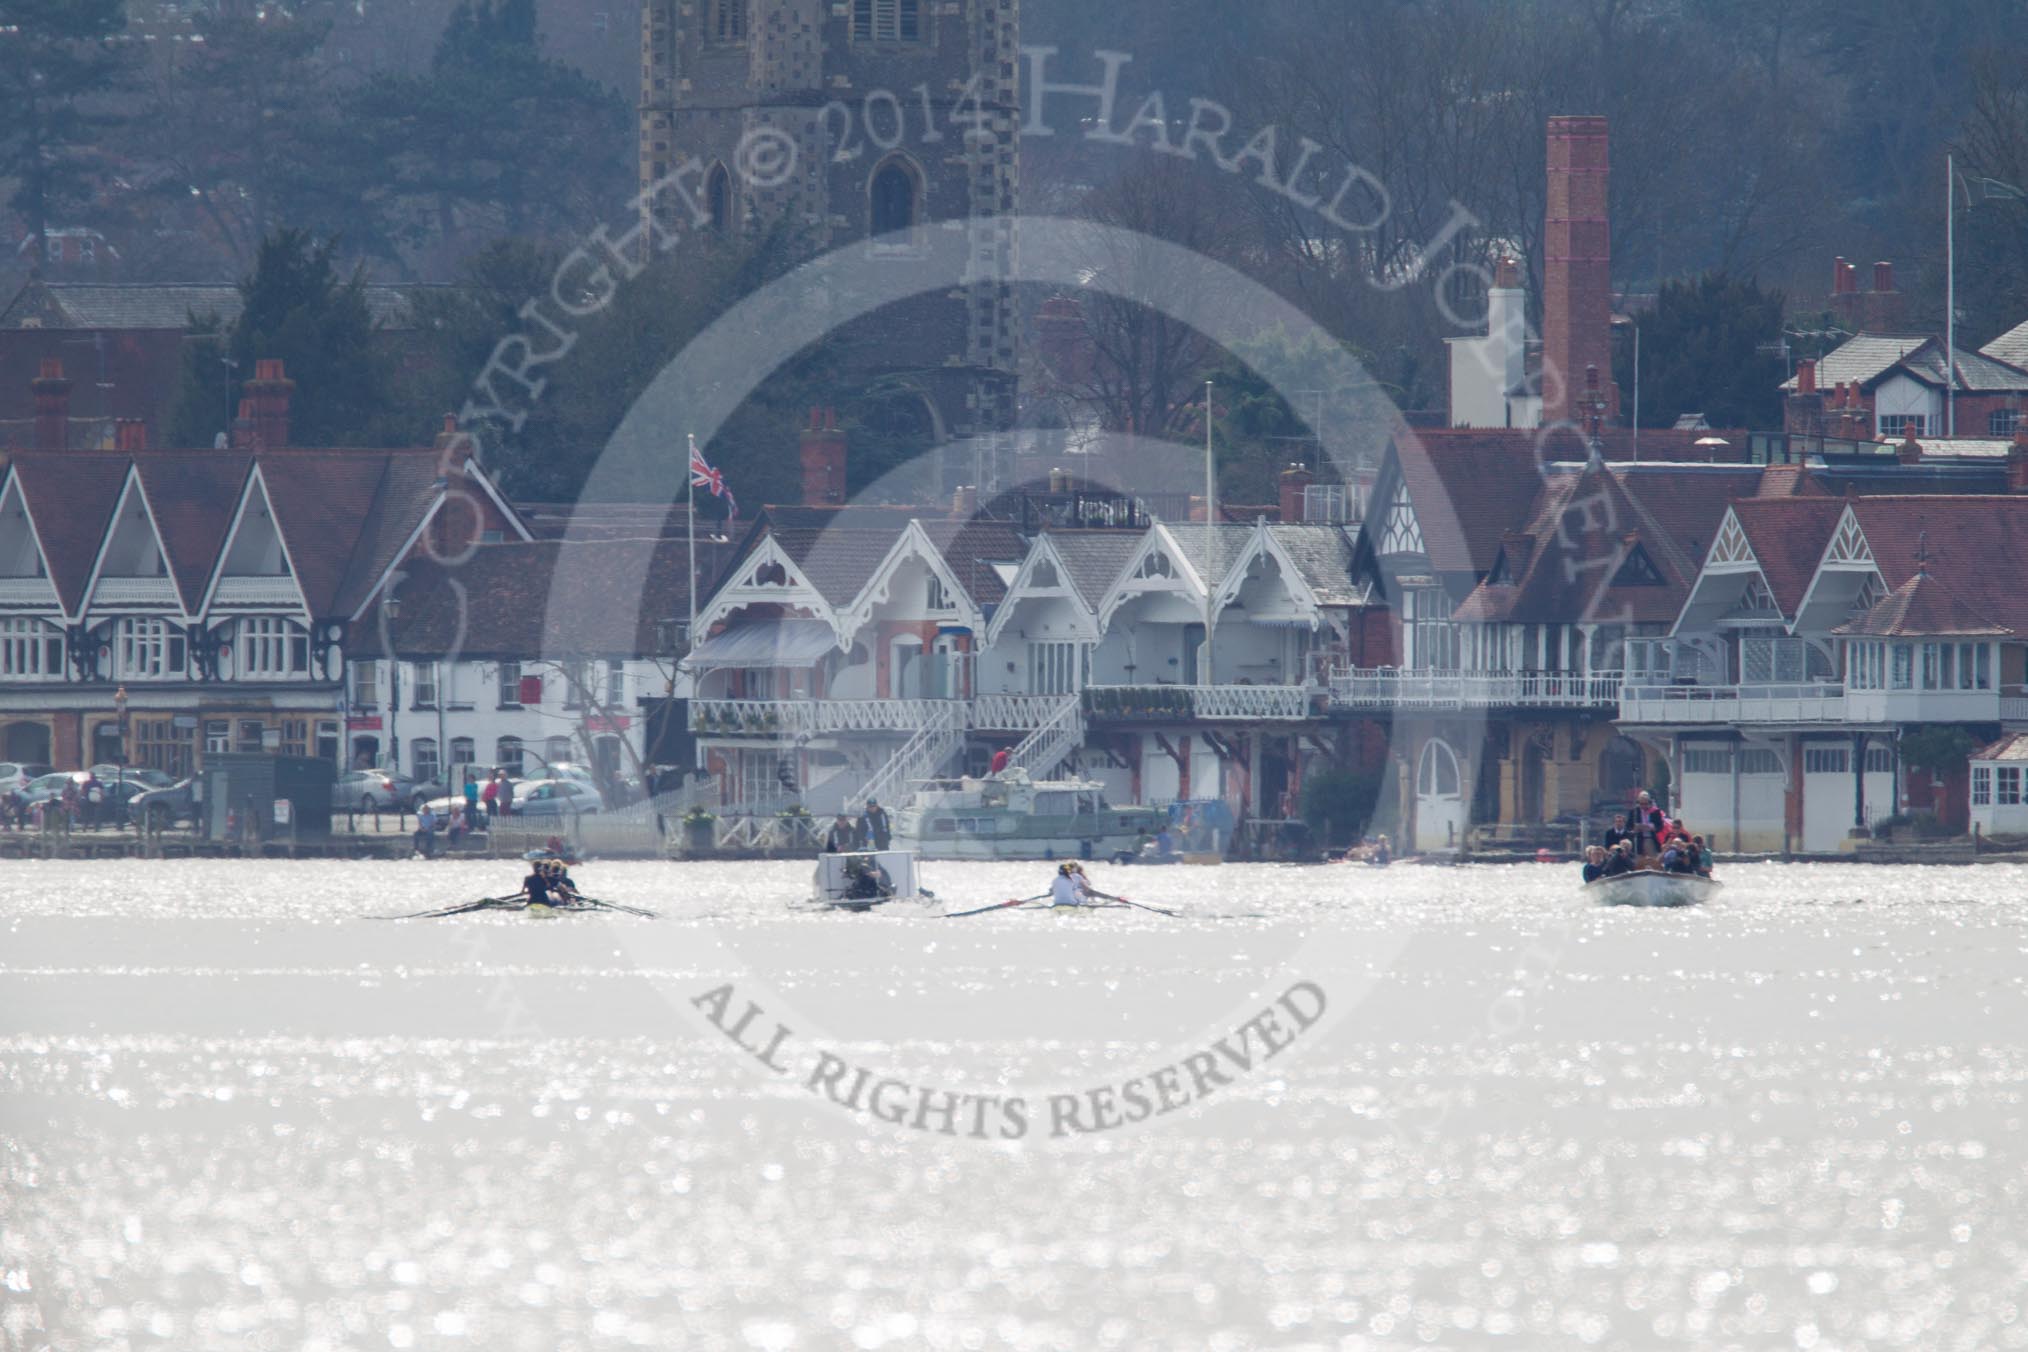 The Women's Boat Race and Henley Boat Races 2014: The Women's Reserves - Osiris v. Blondie race - shortly after the start at Henley. Osiris (Oxford) is on the left, Blondie (Cambridge) on the right..
River Thames,
Henley-on-Thames,
Buckinghamshire,
United Kingdom,
on 30 March 2014 at 14:13, image #136